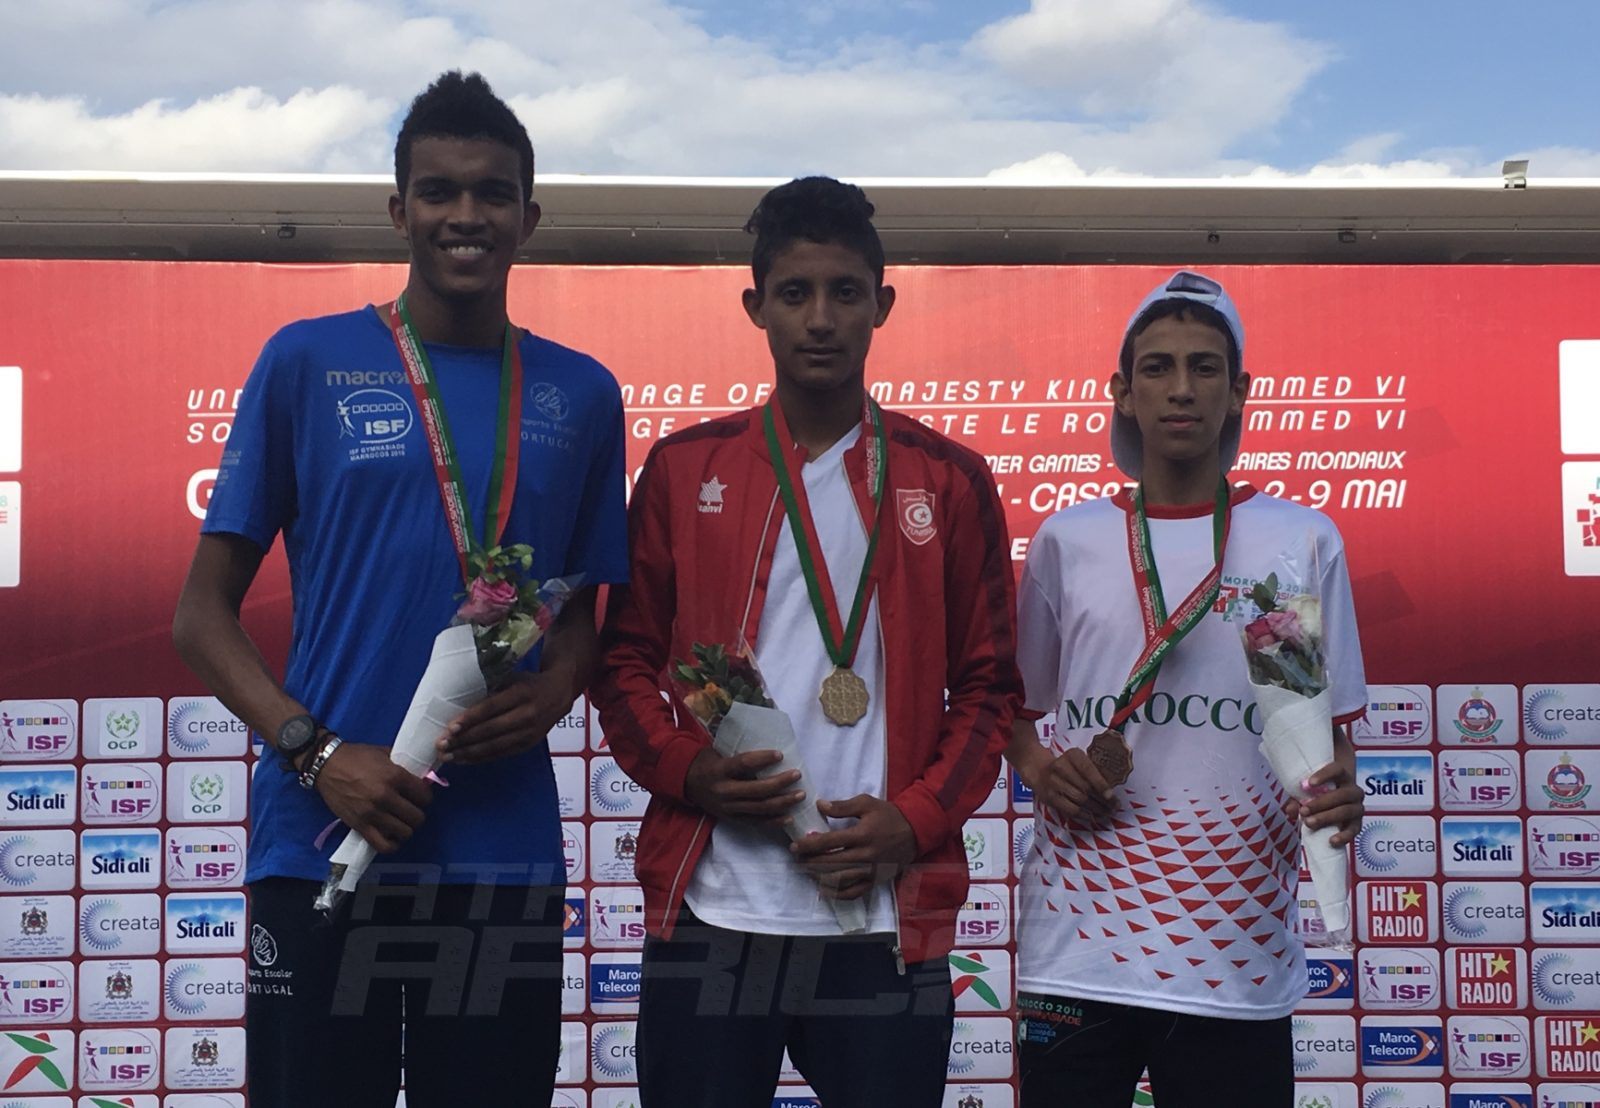 Tunisia's Ahmed Sayf Kadri (C) flanked by Portugal's Etson Barros and Mohamed Dahmouch of Morocco on the podium after the Boys 2000m Steeplechase medal presentation at Gymnasiade 2018 in Marrakech / Photo Credit: Yomi Omogbeja